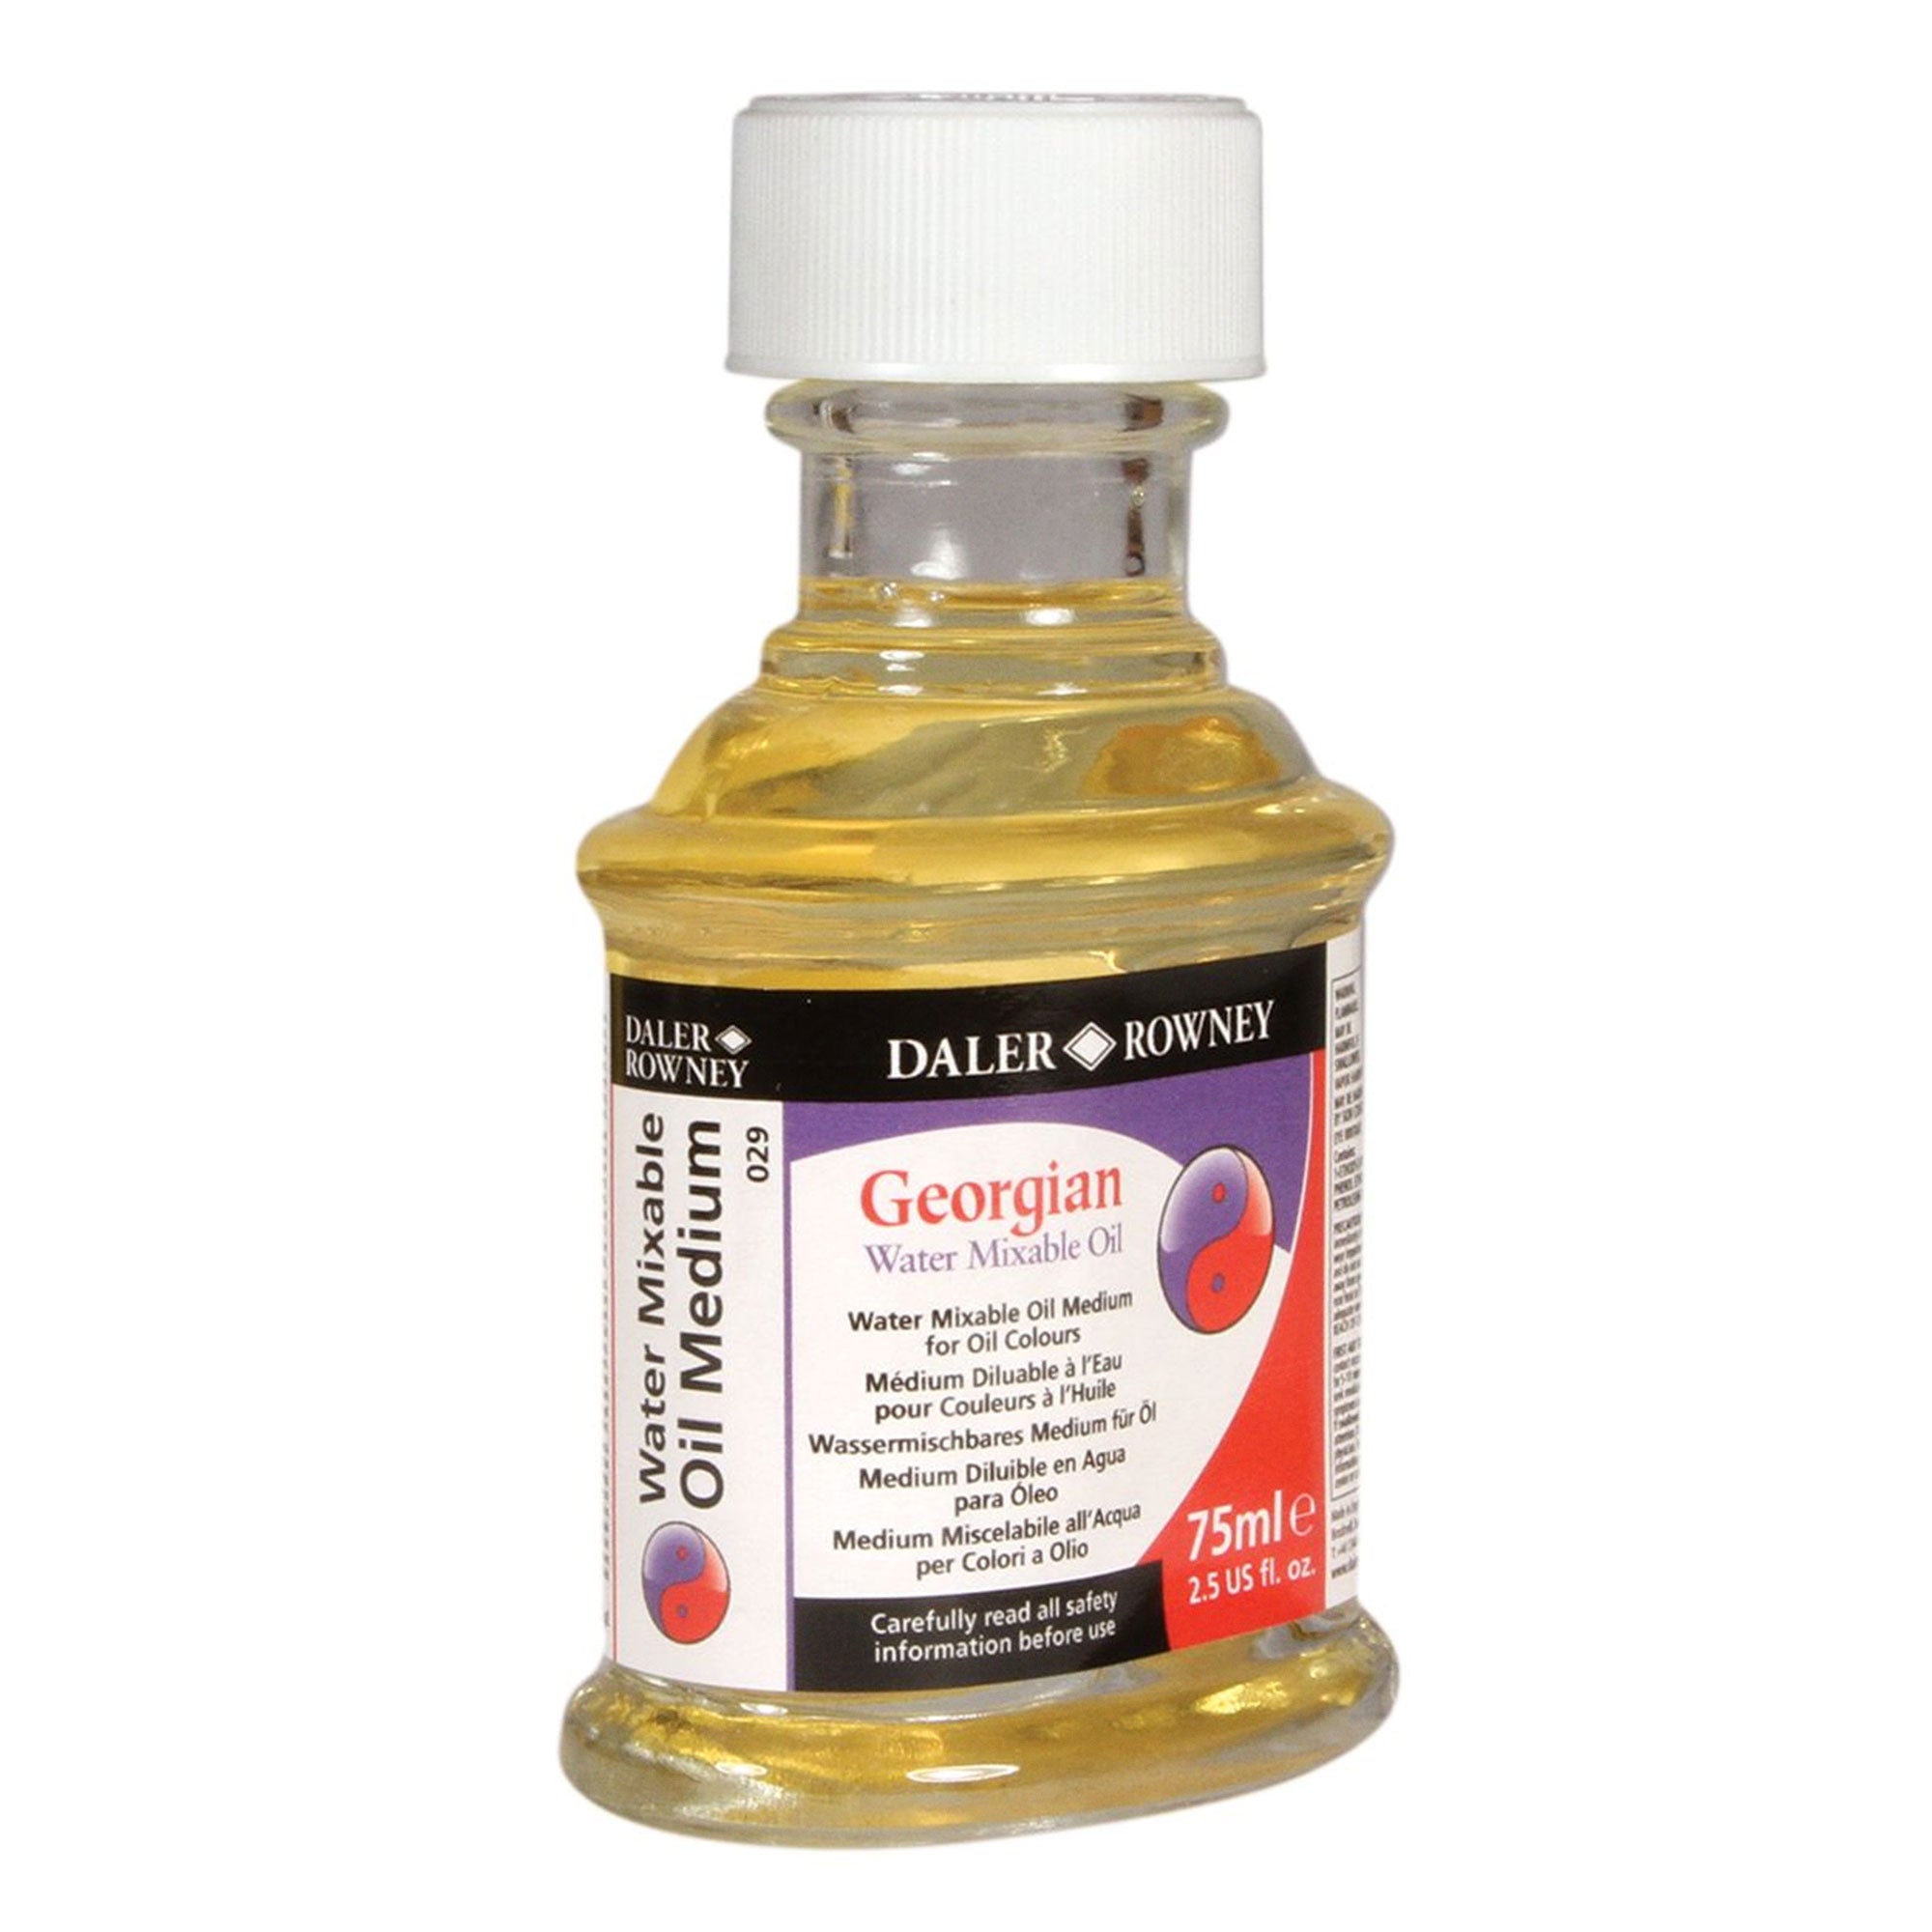 Daler-Rowney Water Mixable Oil Medium for Oil Colours (75ml)